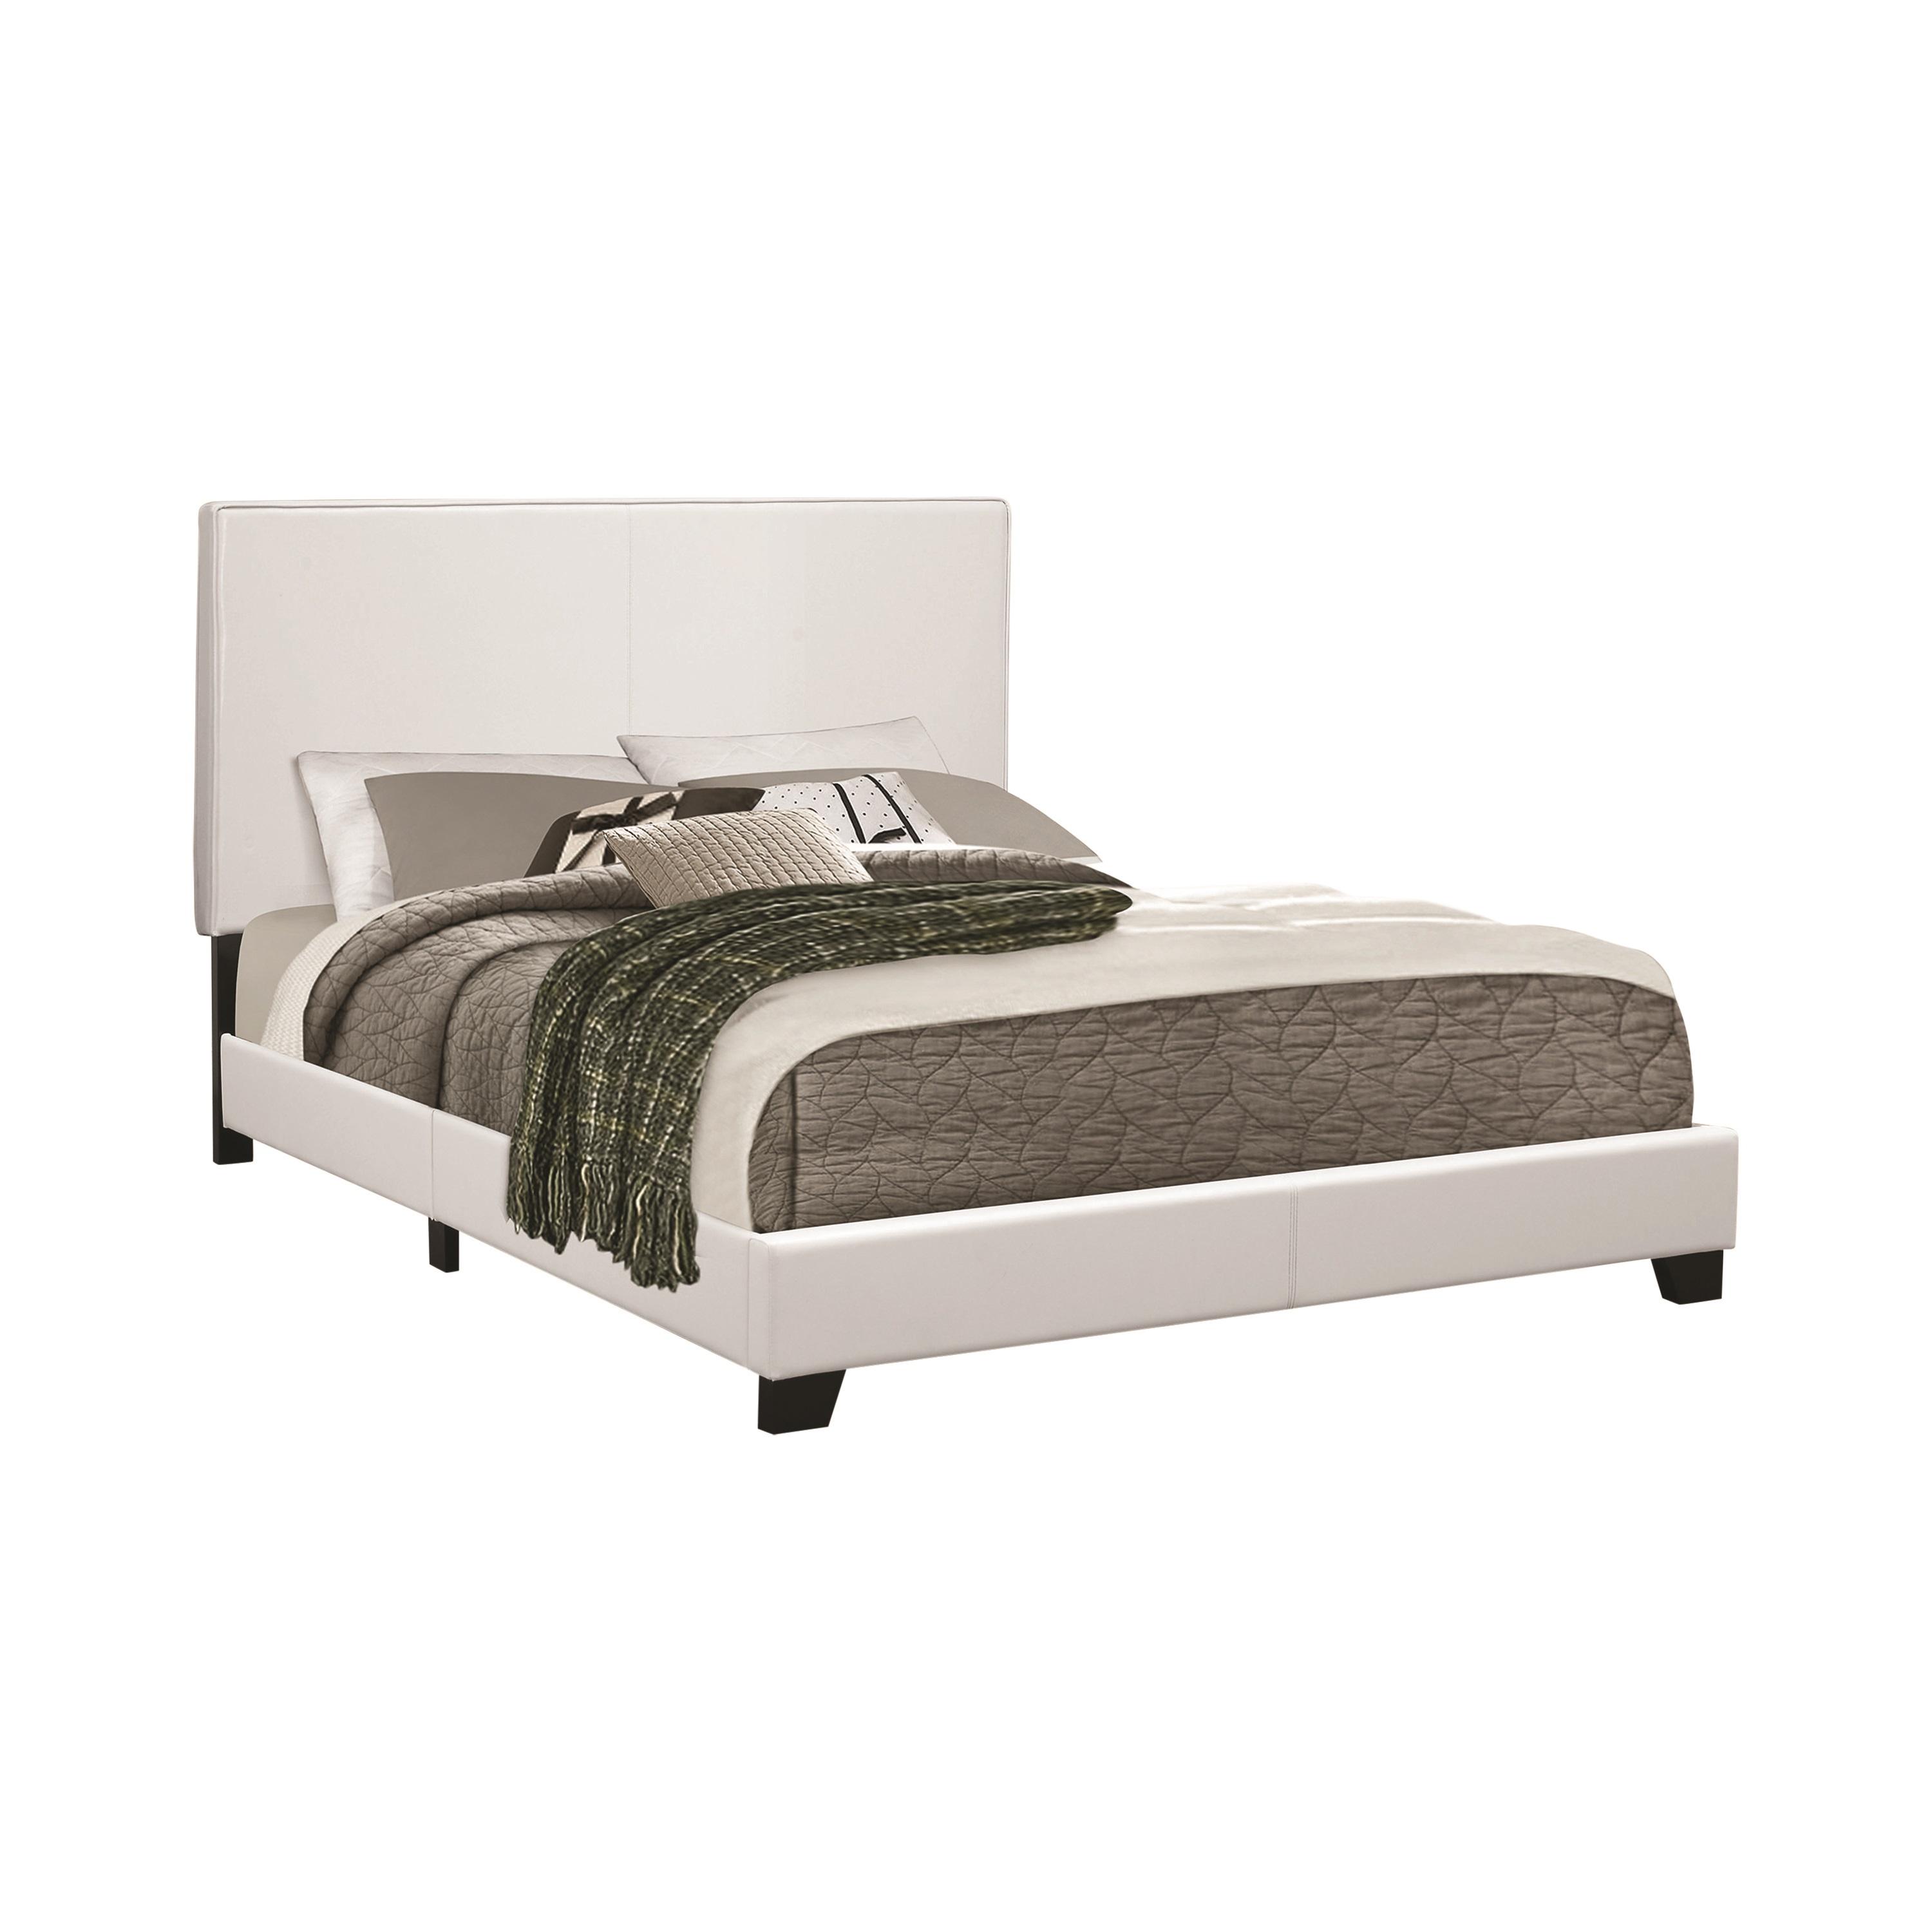 Modern Bed 300559F Muave 300559F in White Leatherette